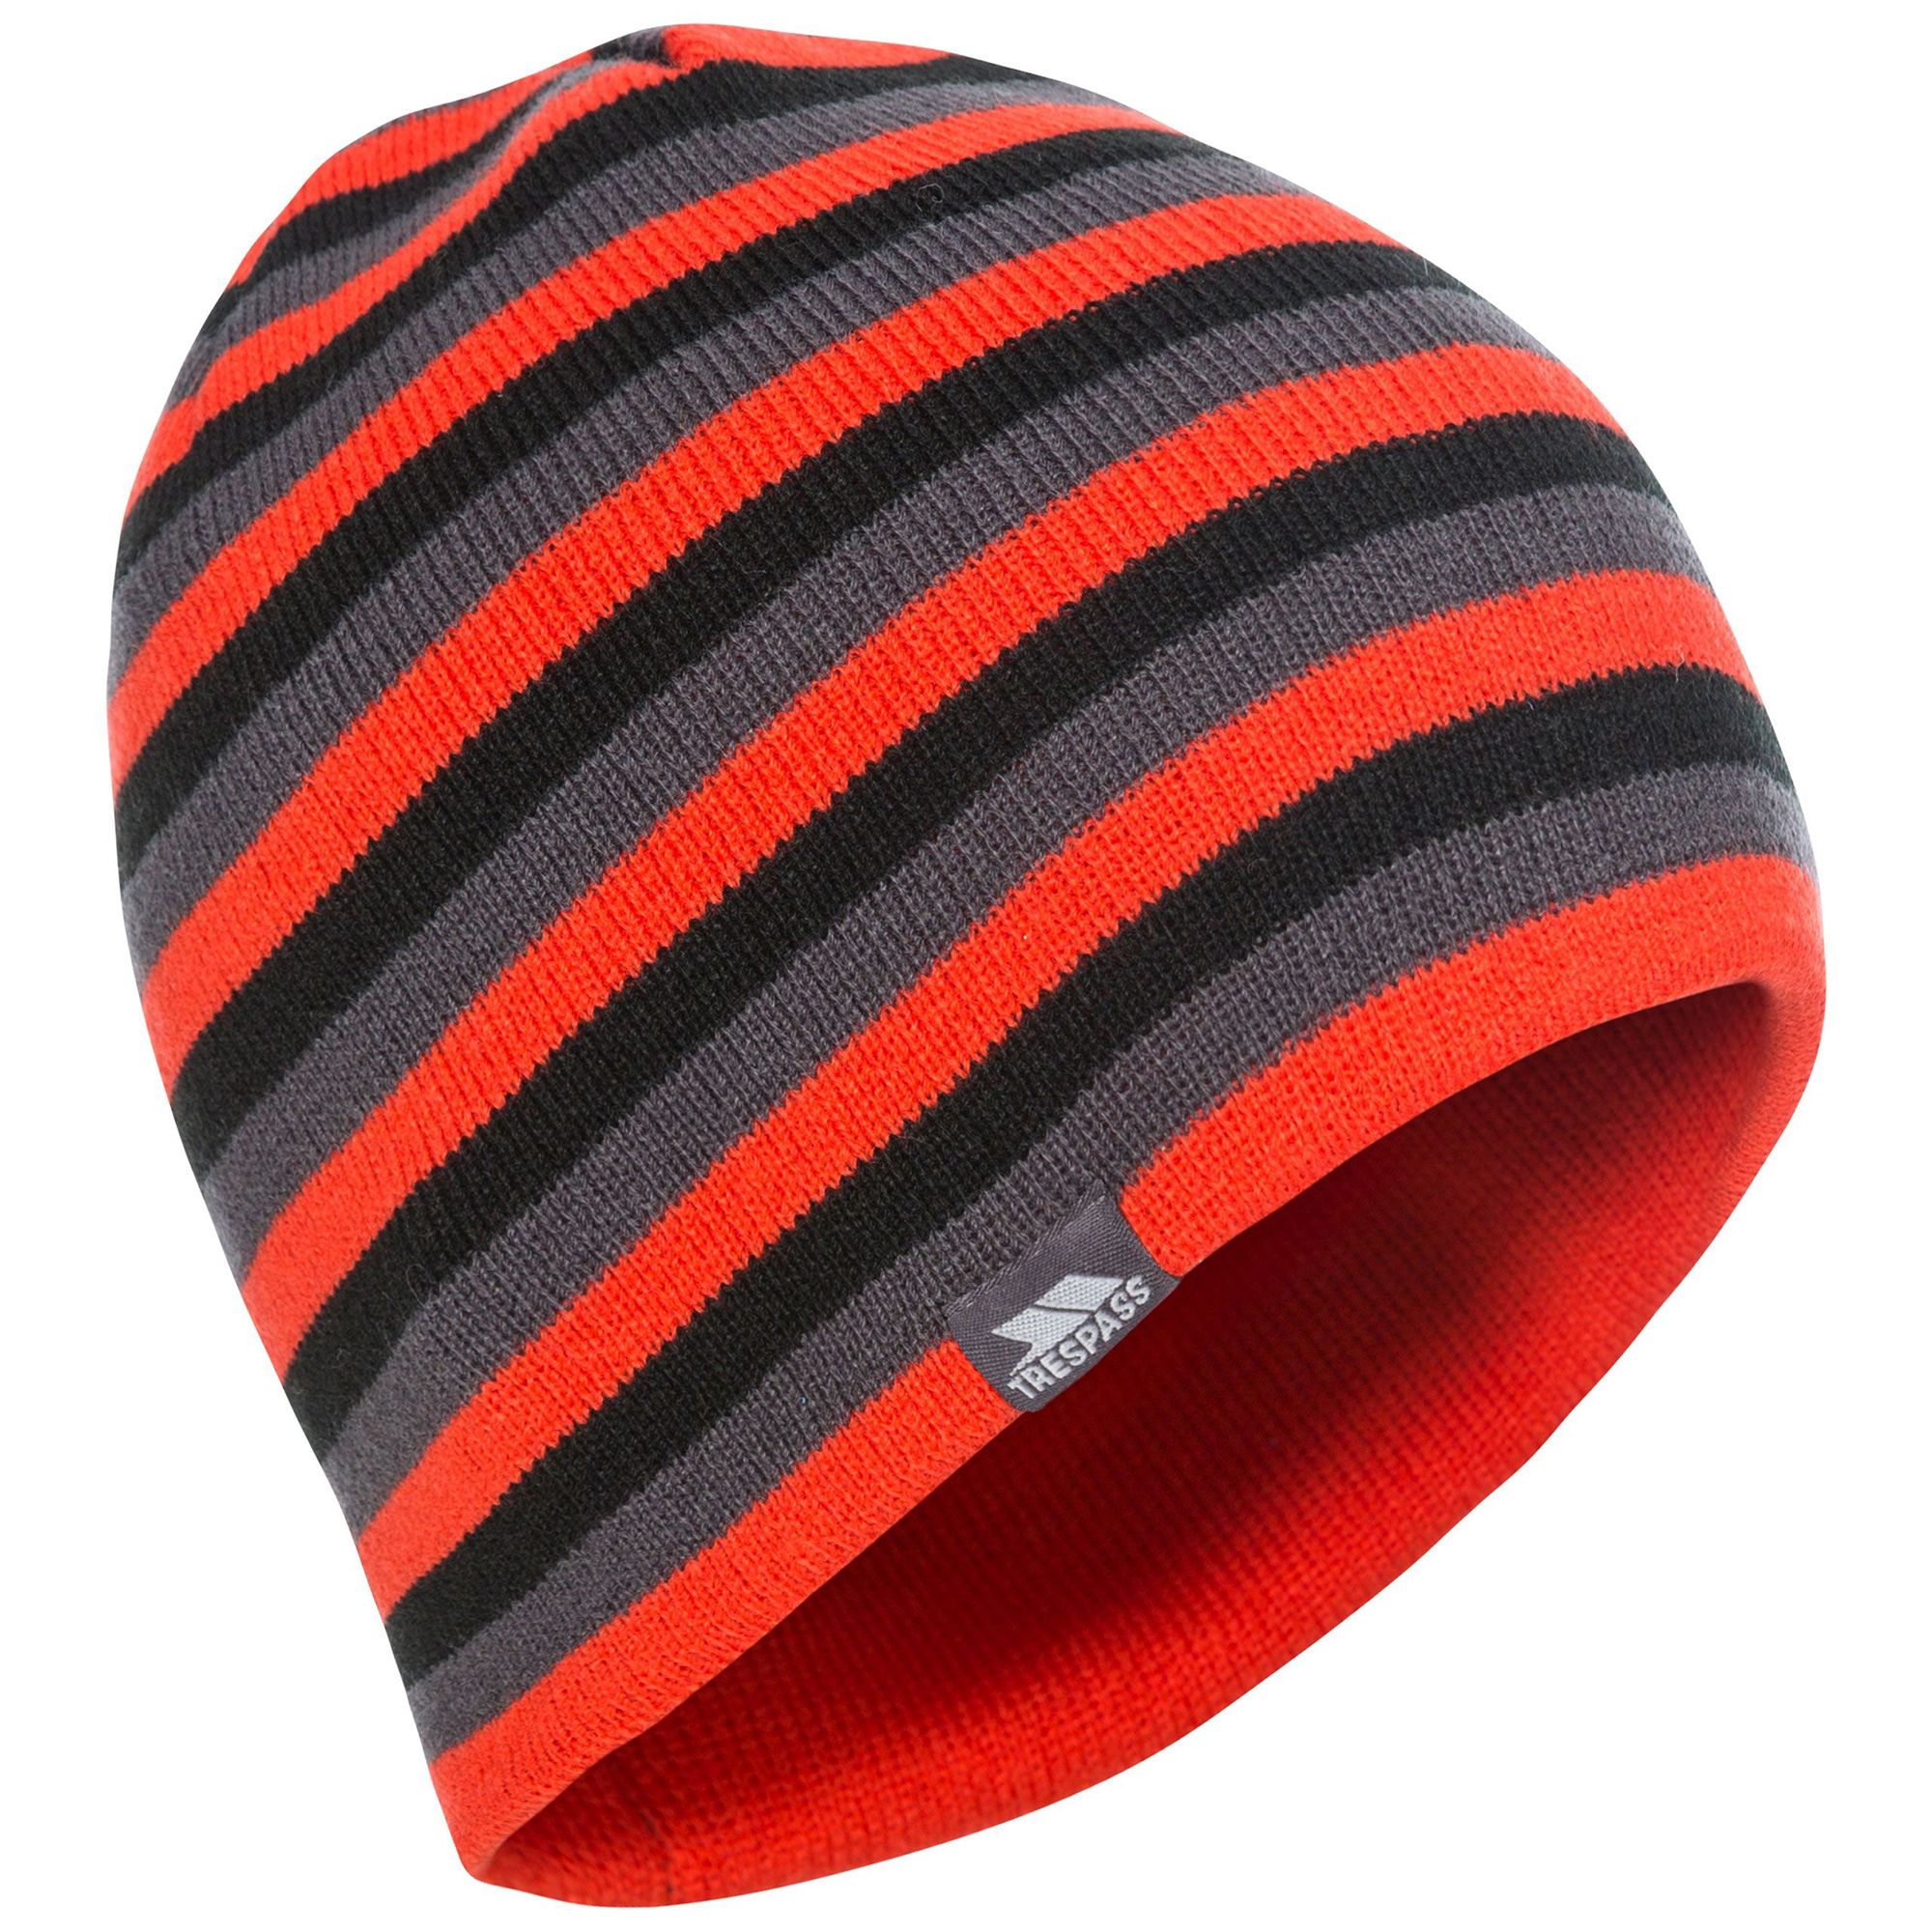 The Coaker men`s knitted beanie will allow you to add a little colour to your day as well as stay warm when running errands during the winter months. Reversible. Material: 100% knitted acrylic.